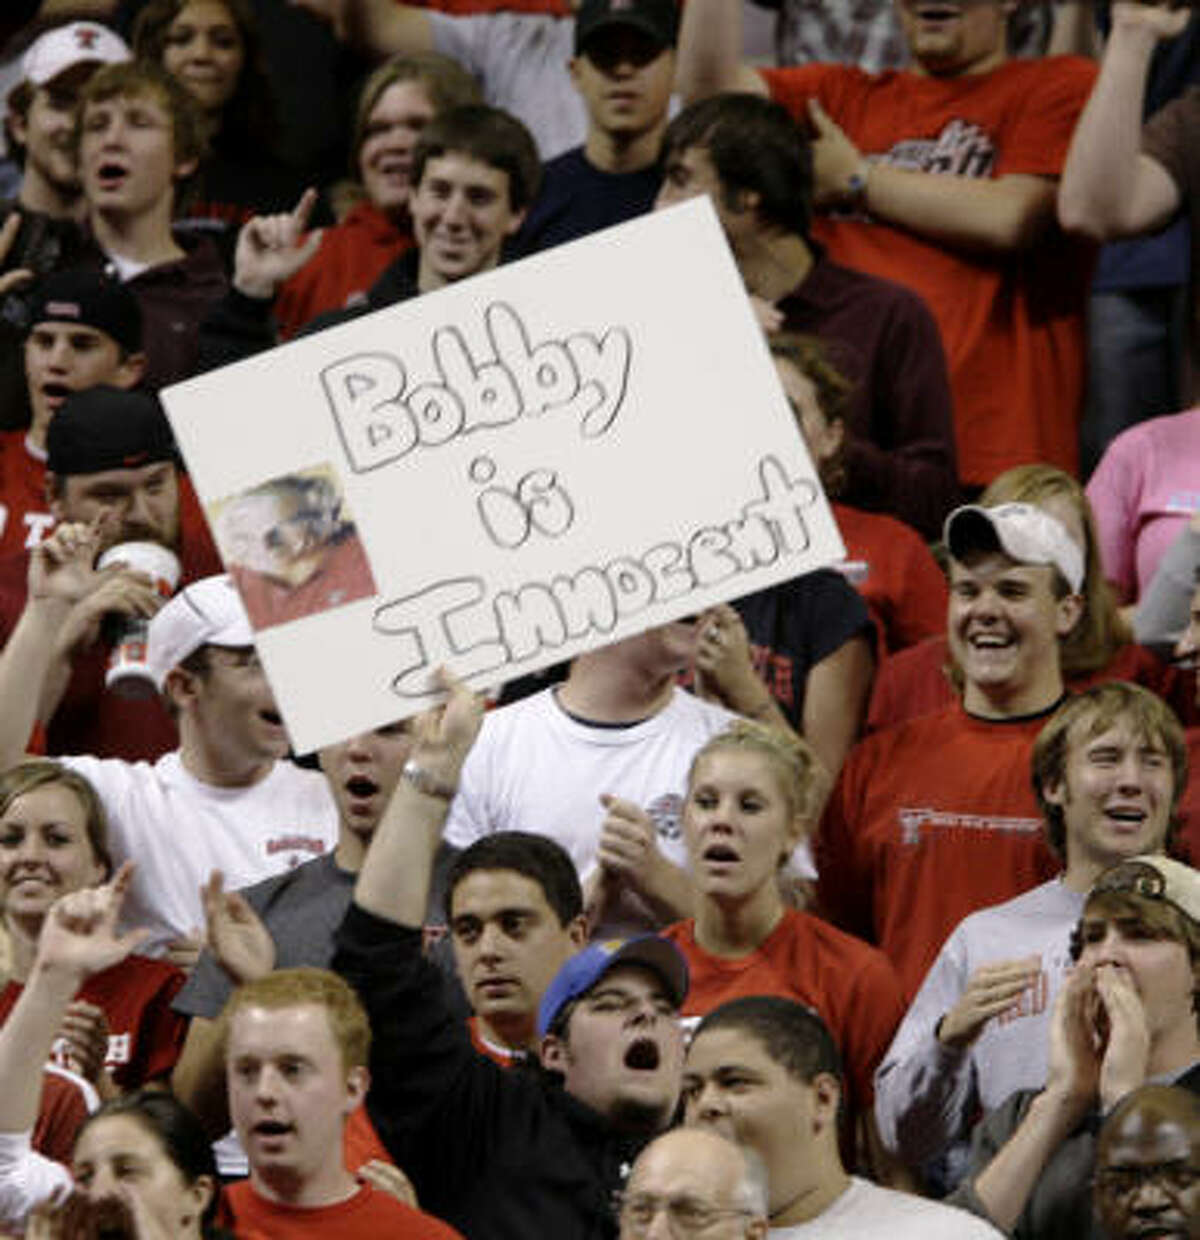 Public sentiment in Lubbock seems to favor Bob Knight, at least in one section of the crowd. A fan brought a sign to Tuesday's game between Texas Tech and Arkansas-Little Rock.